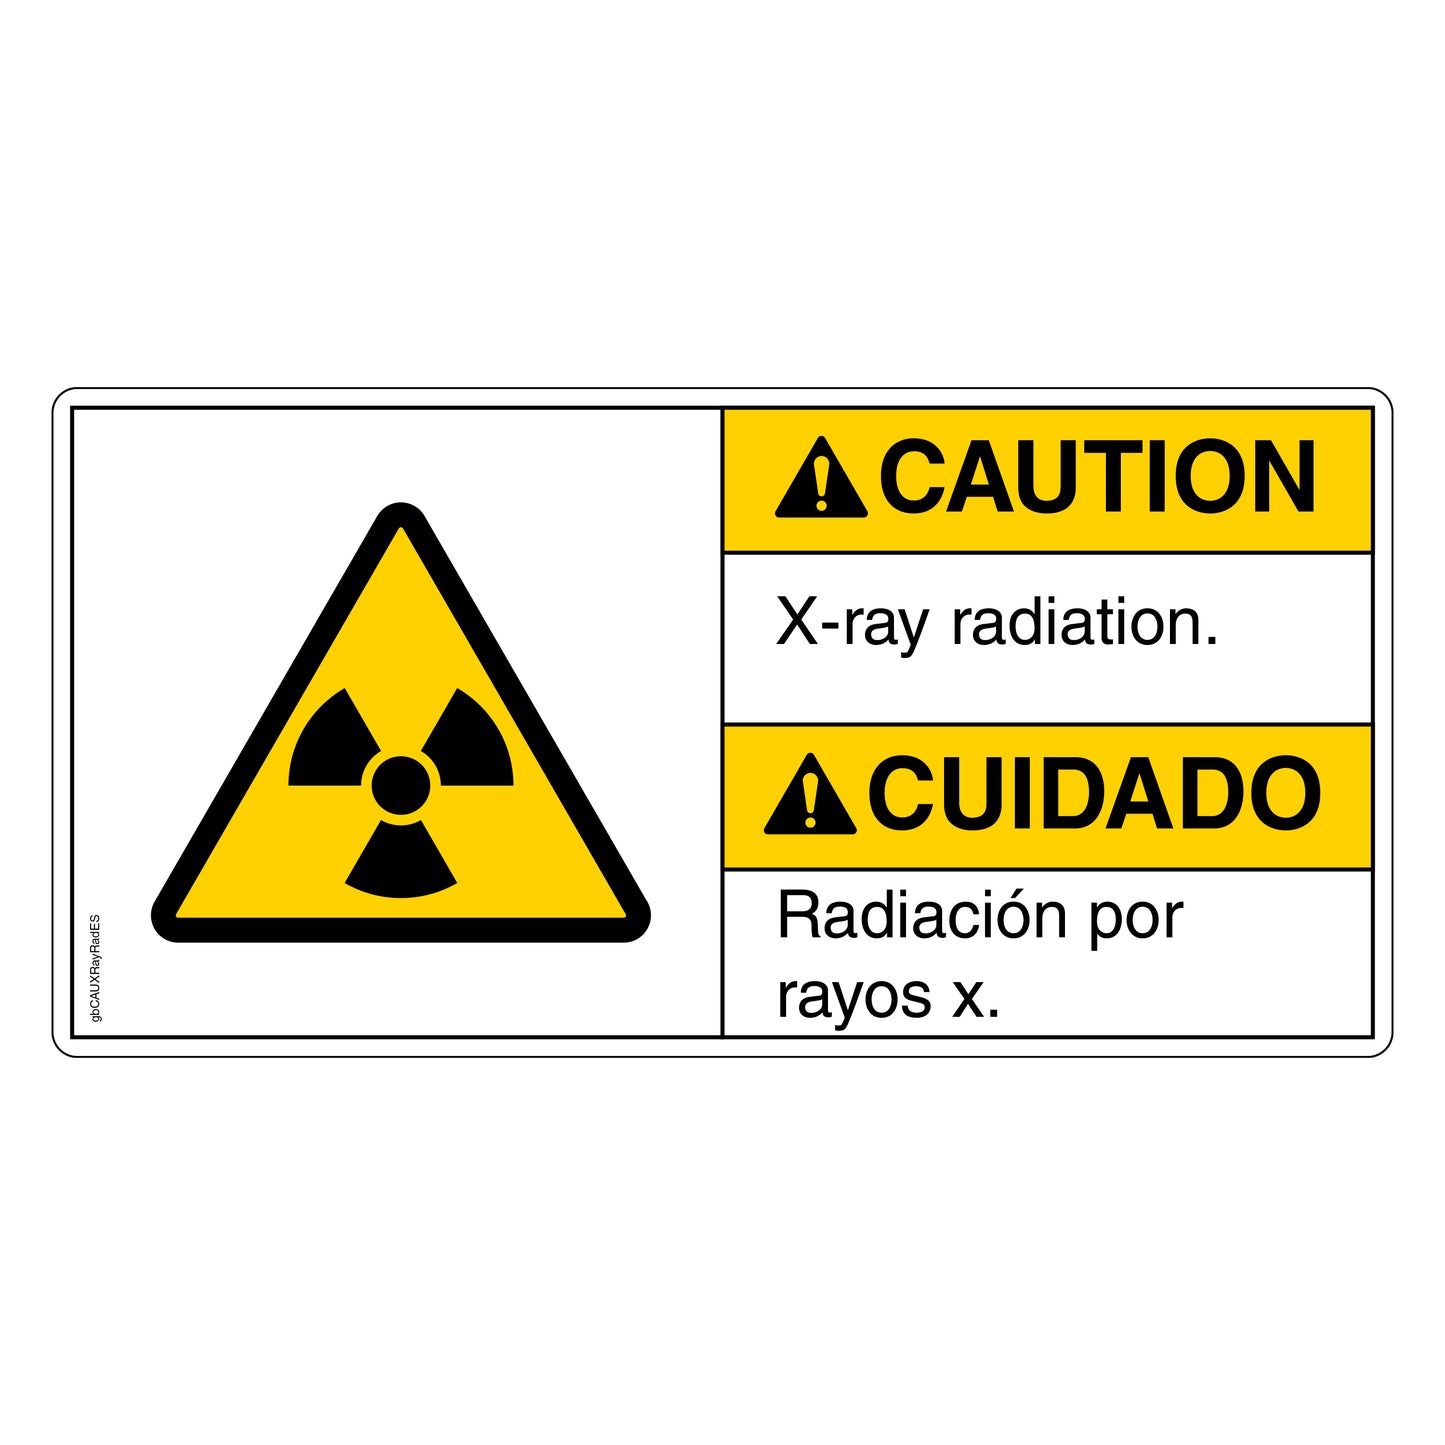 Caution X-Ray Radiation Decal in English and Spanish.